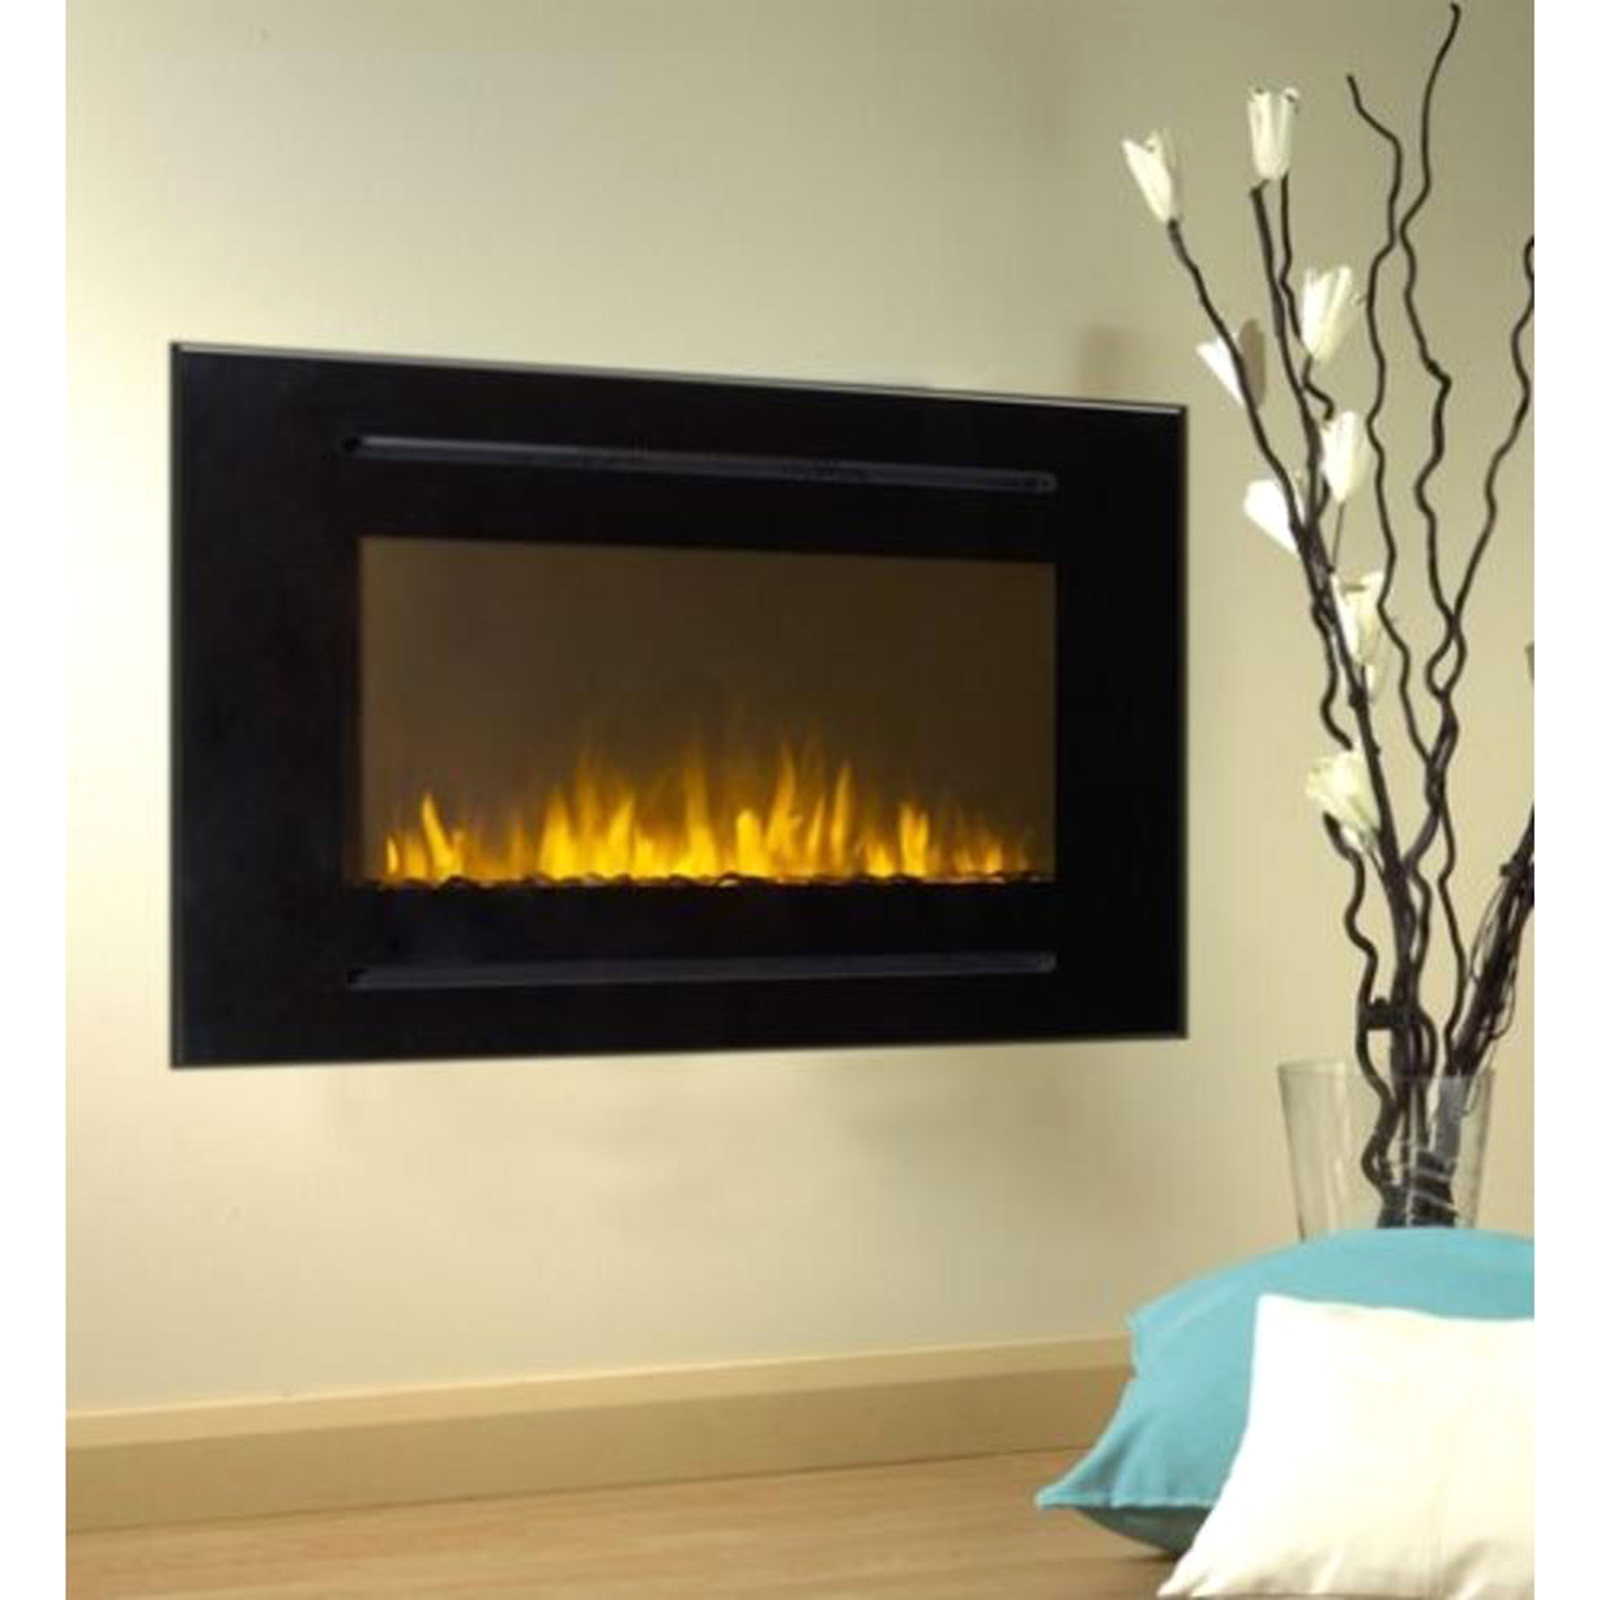 Touchstone Forte 40" Wall Inset Design Wall Mounted Electric Fireplace - Black